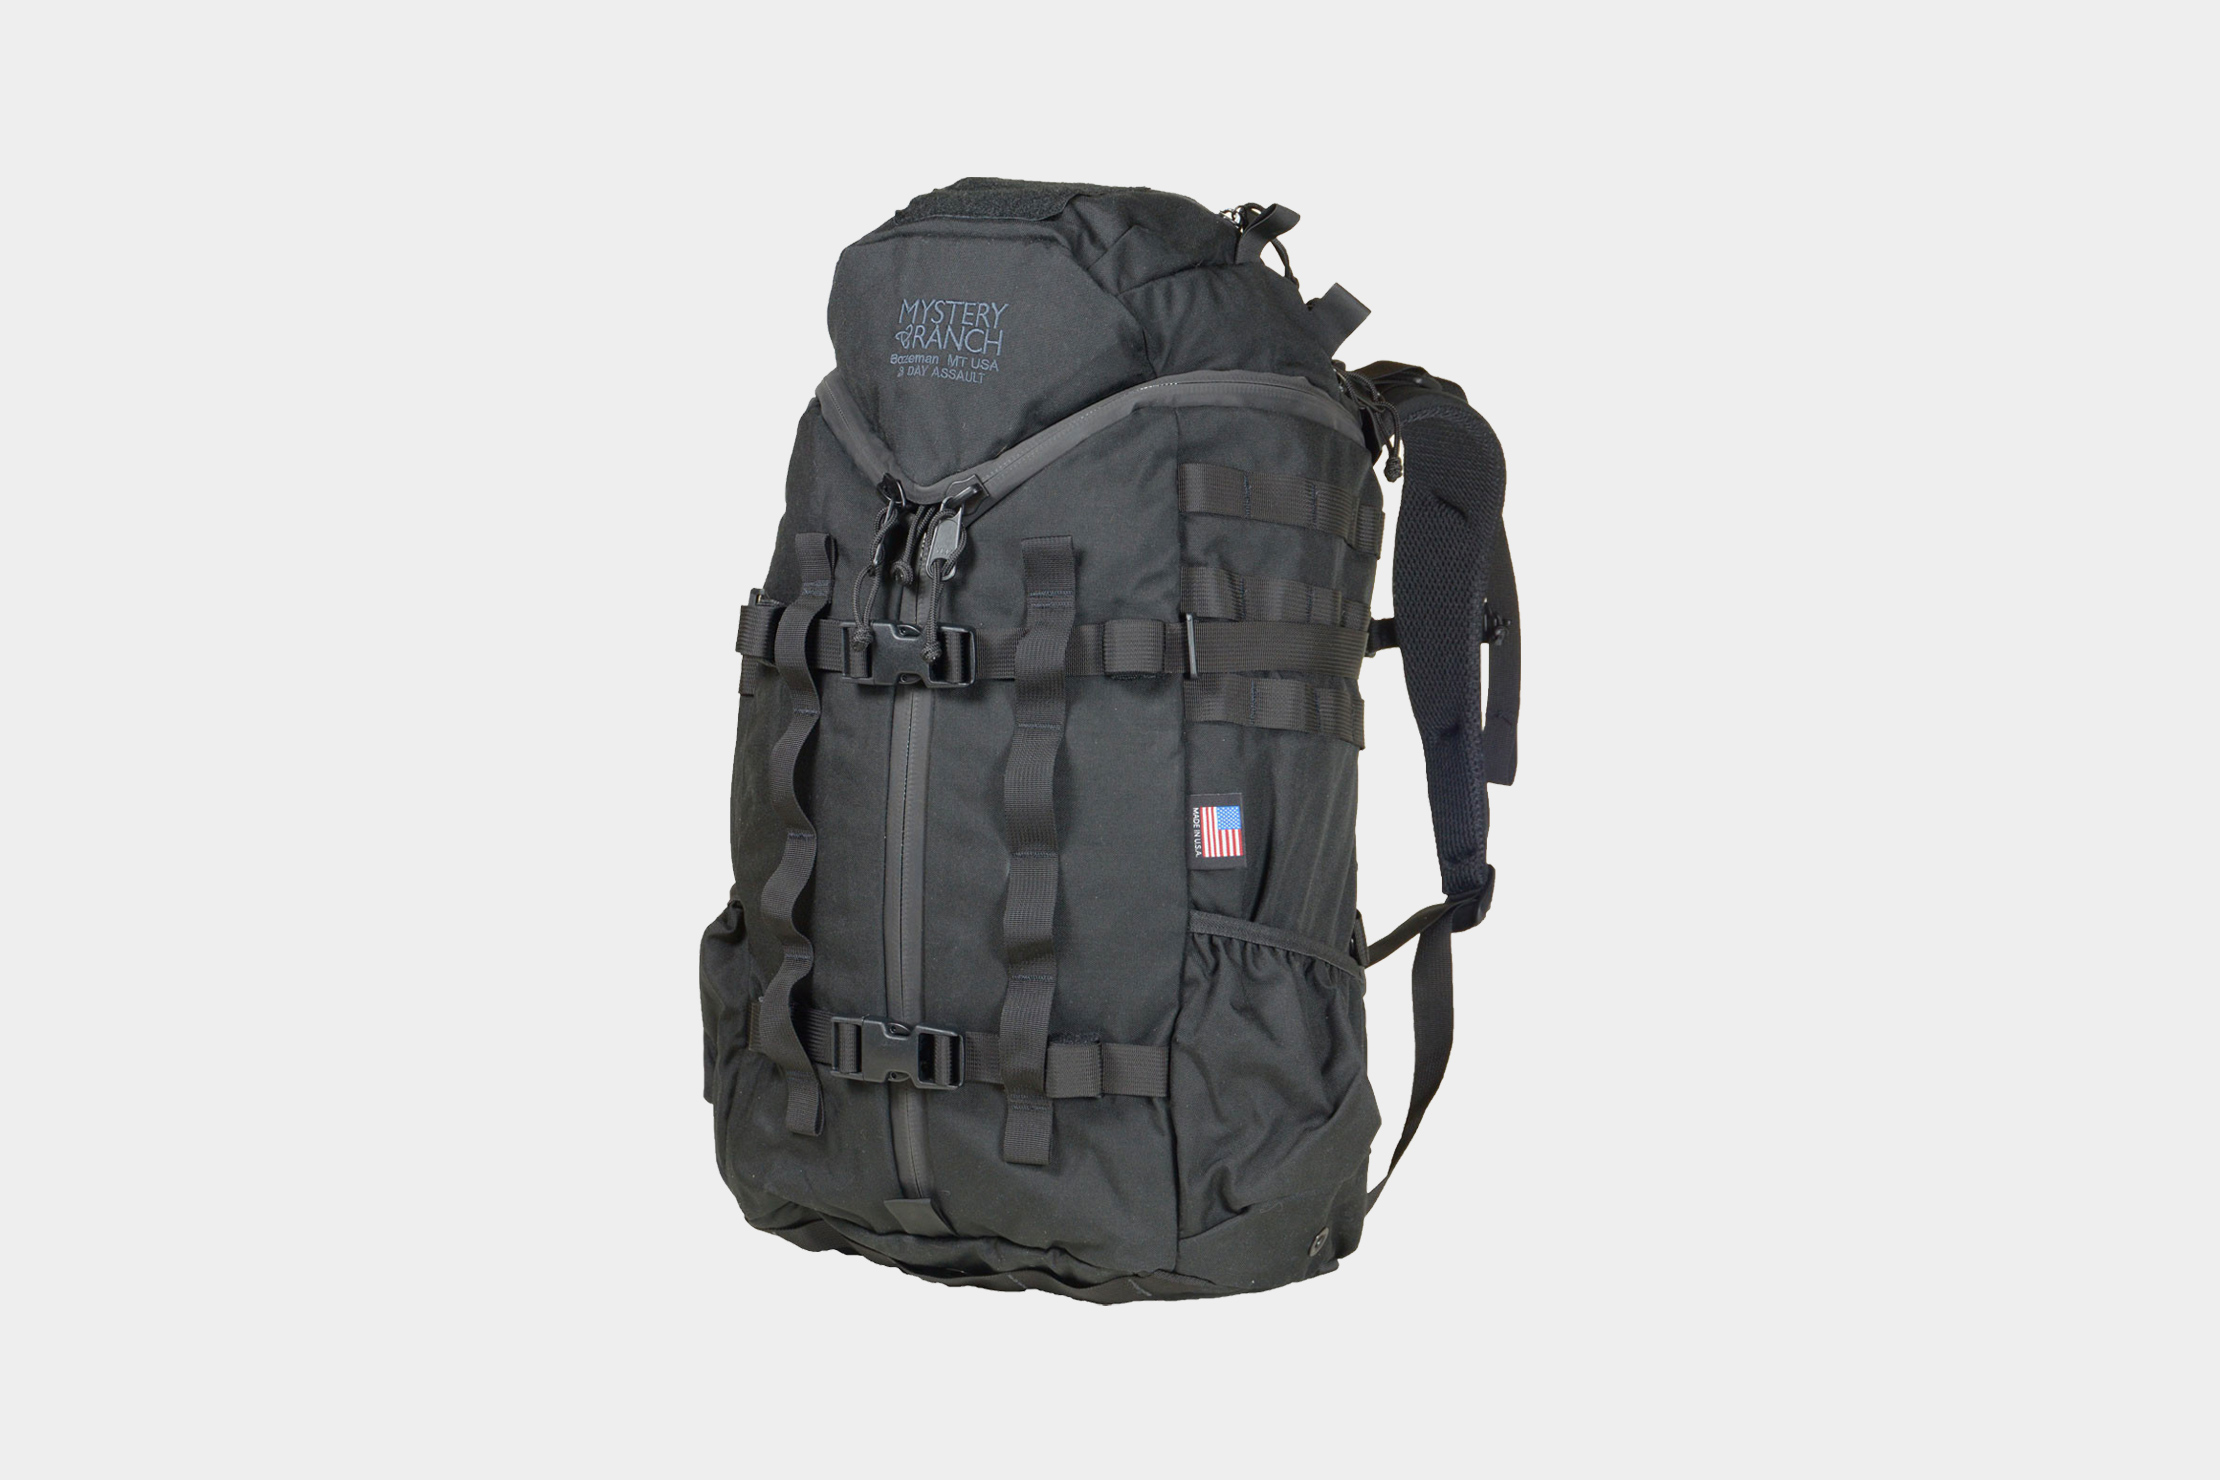 Mystery Ranch 3 Day Assault CL Backpack | Pack Hacker